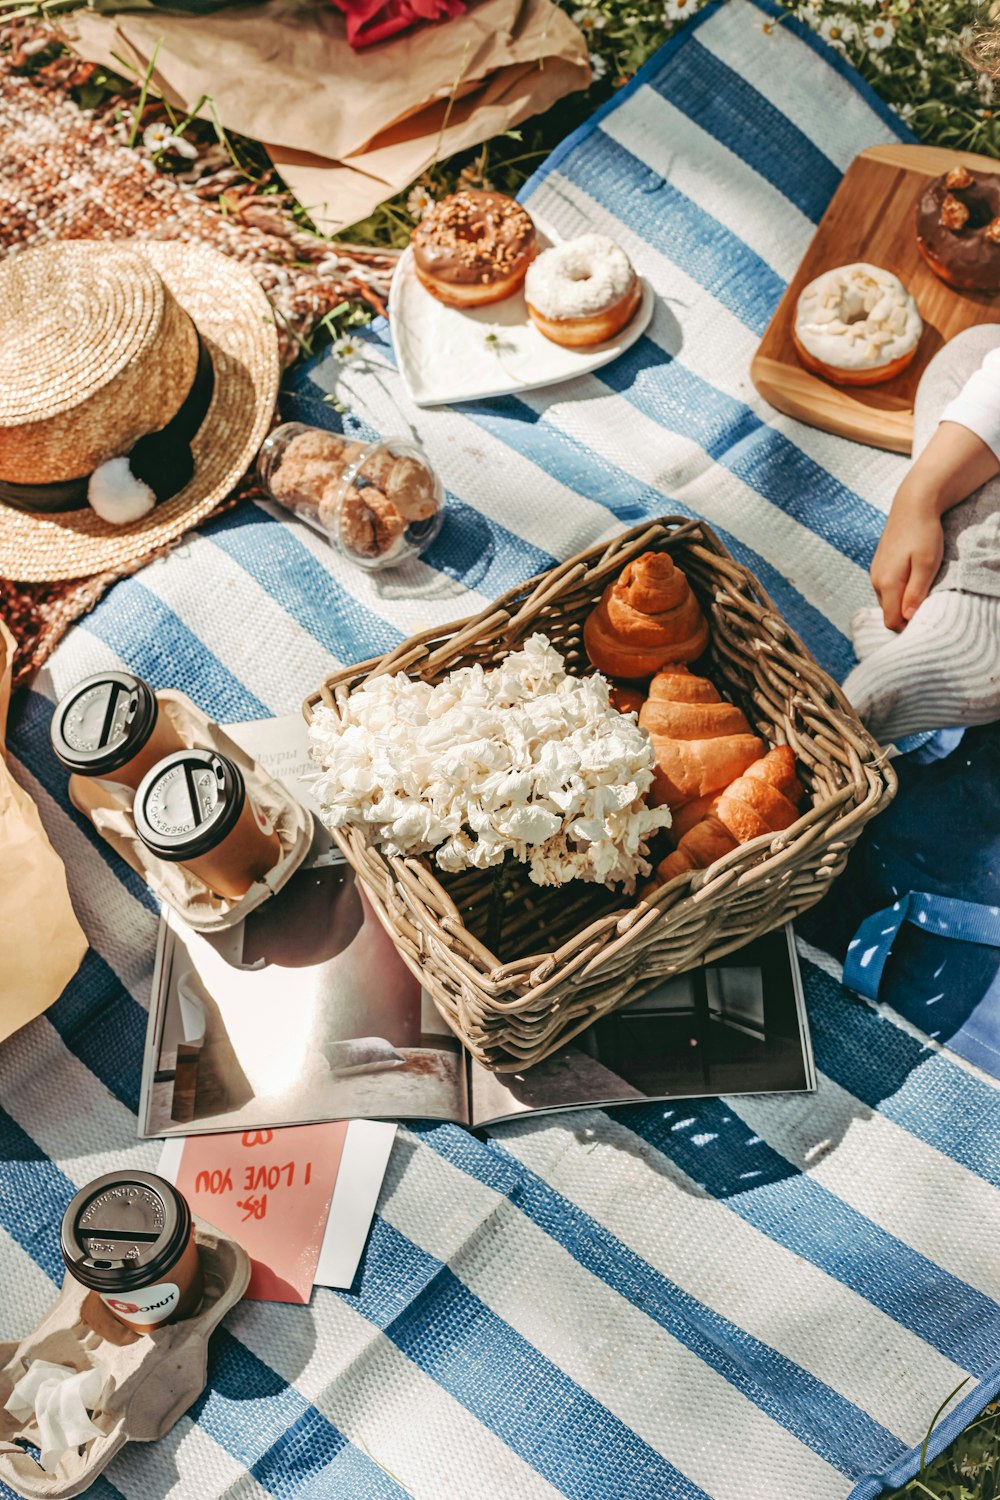 27+ Picnic Pictures | Download Free Images on Unsplash